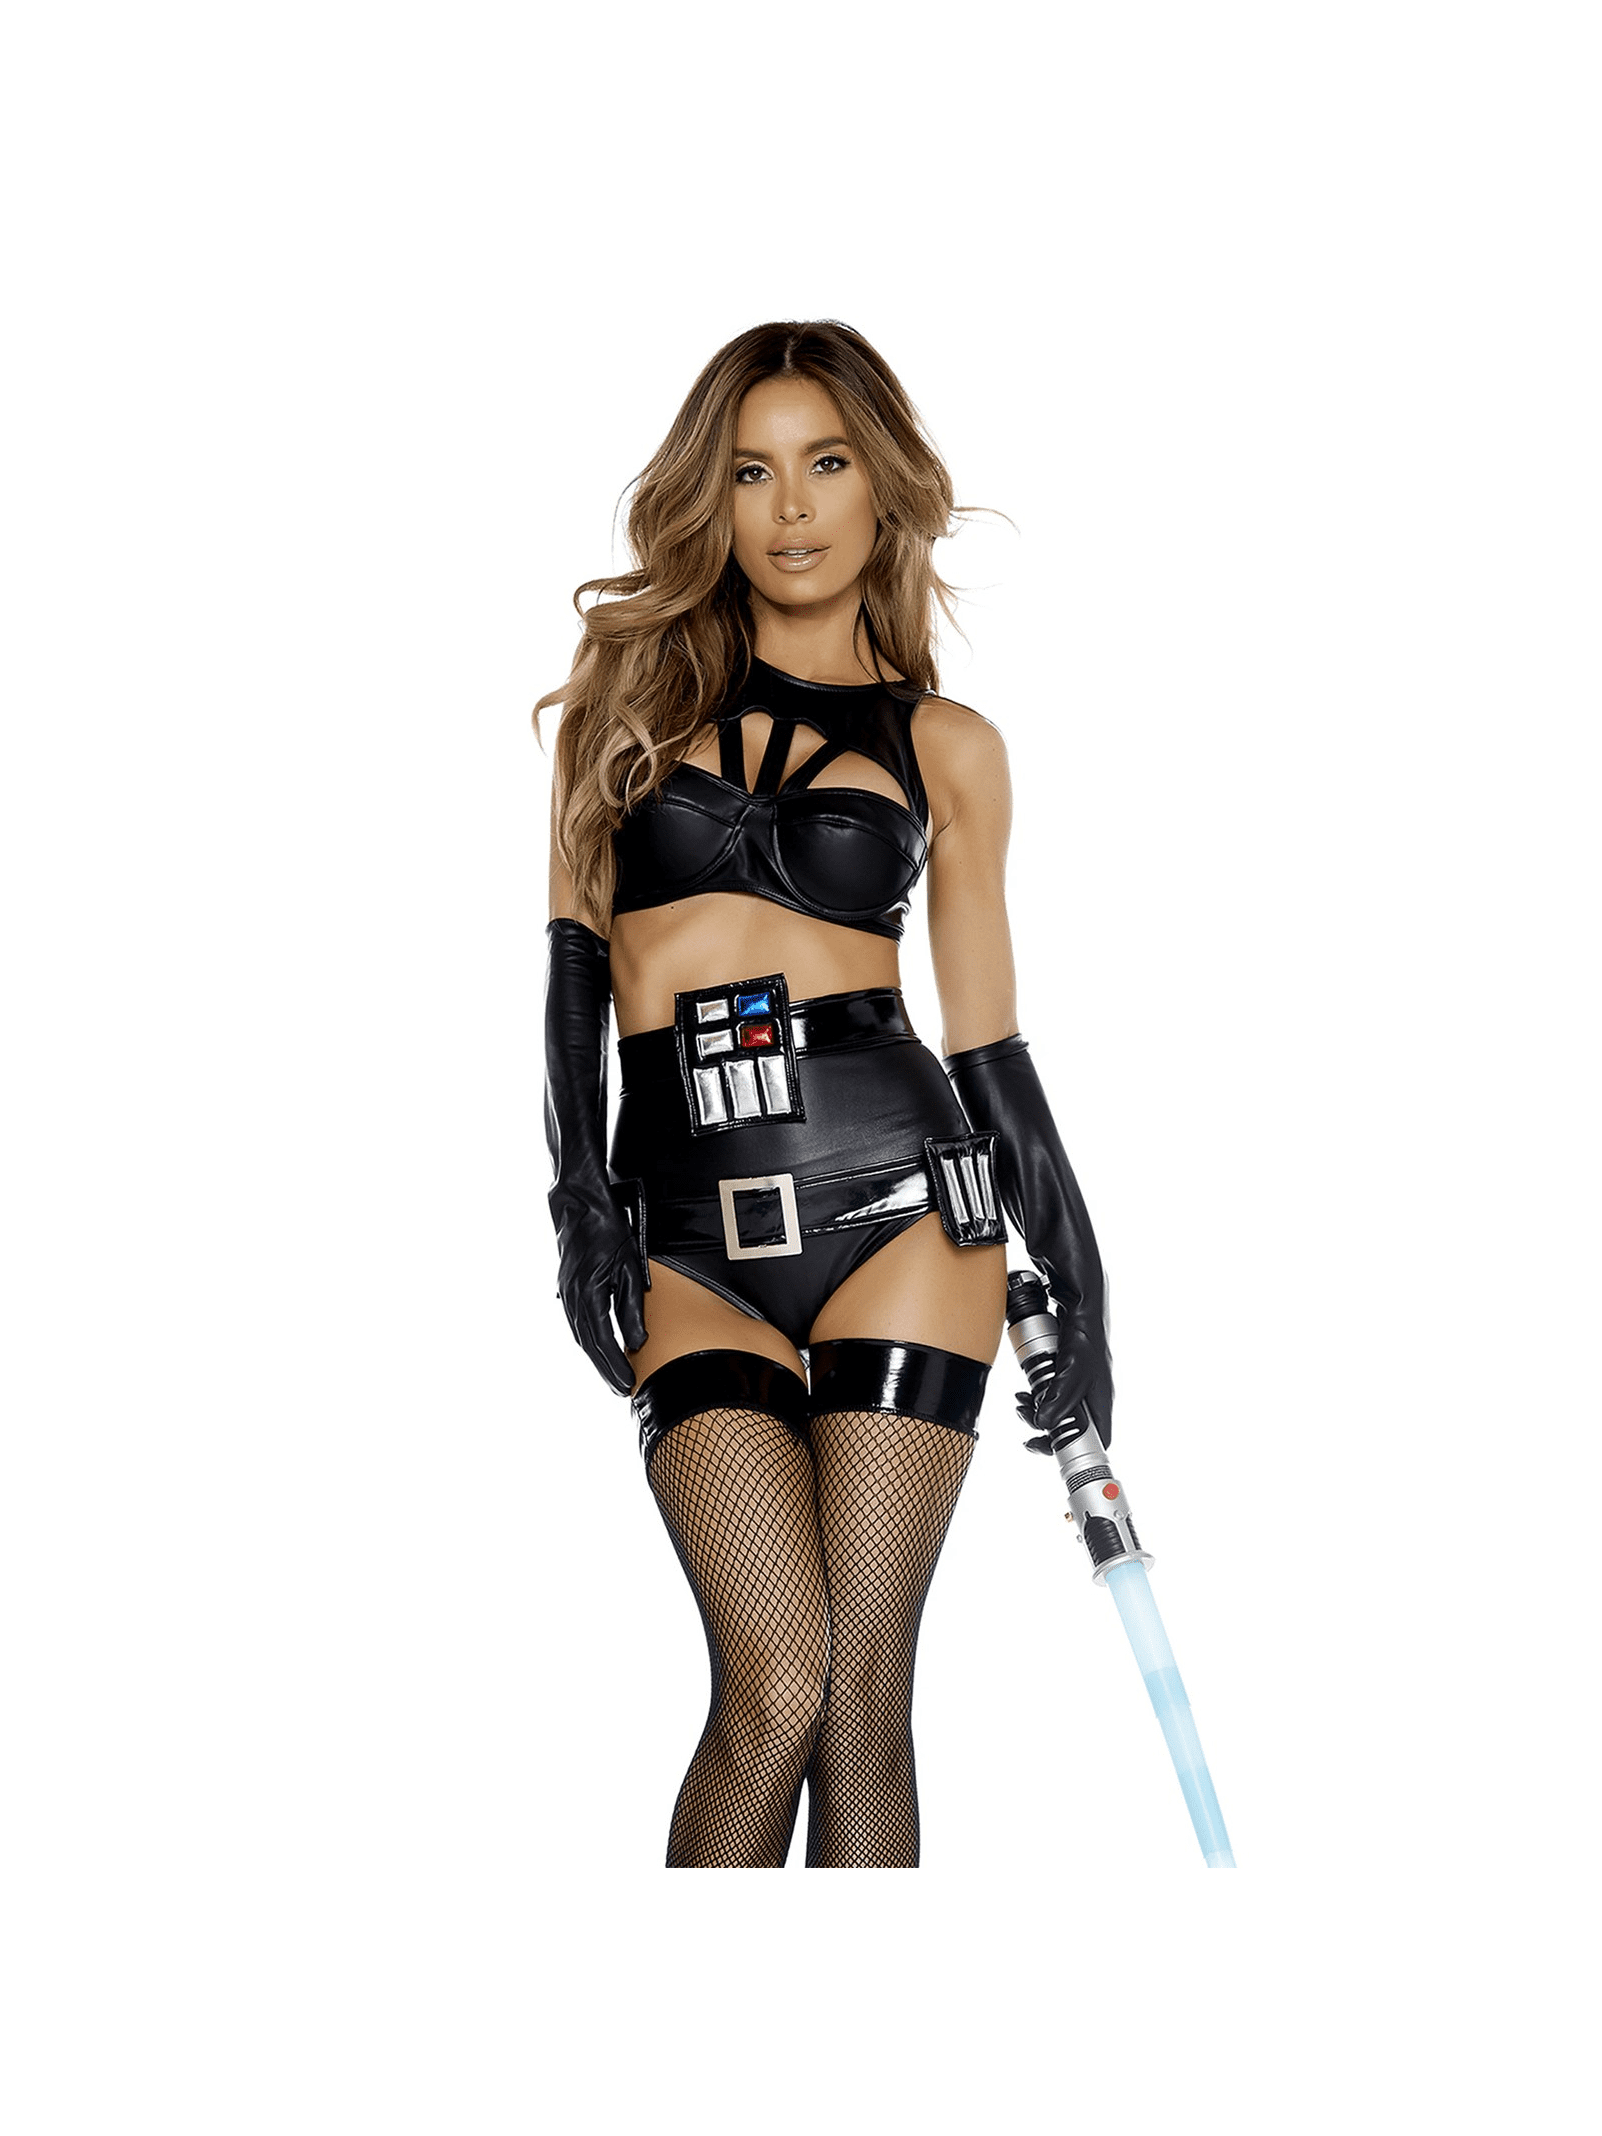 birds paradise recommends star wars lingerie pic